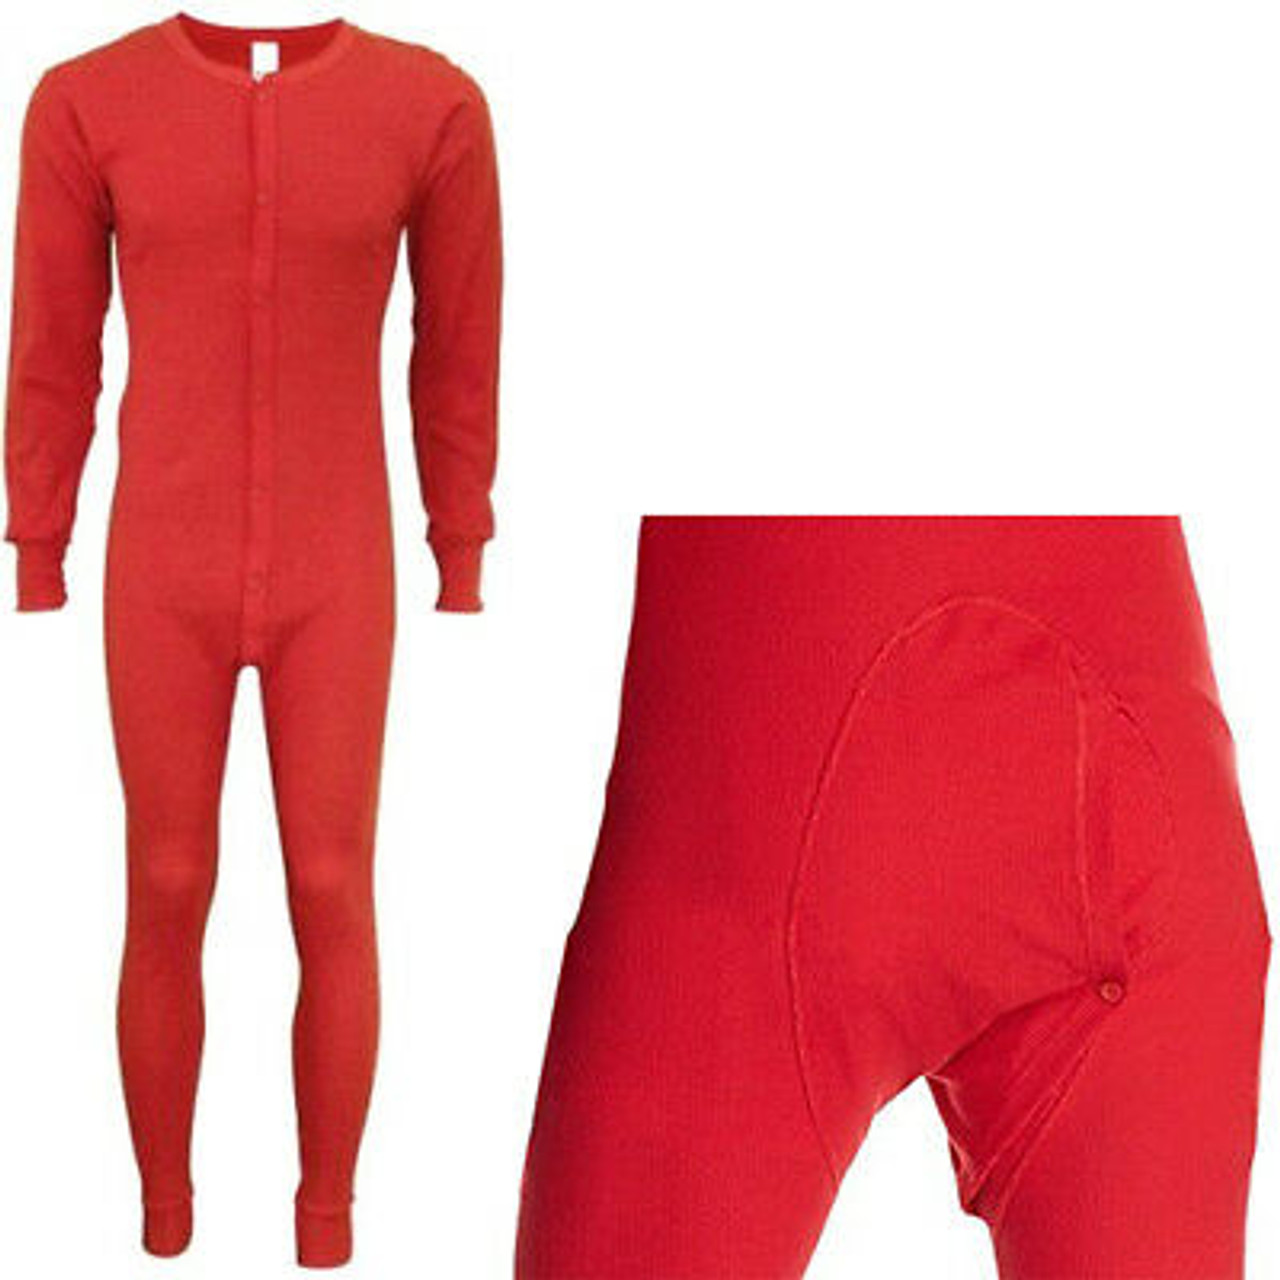 The Original Red Union Suit 100% Cotton One Piece Coverall / Long John  Underwear